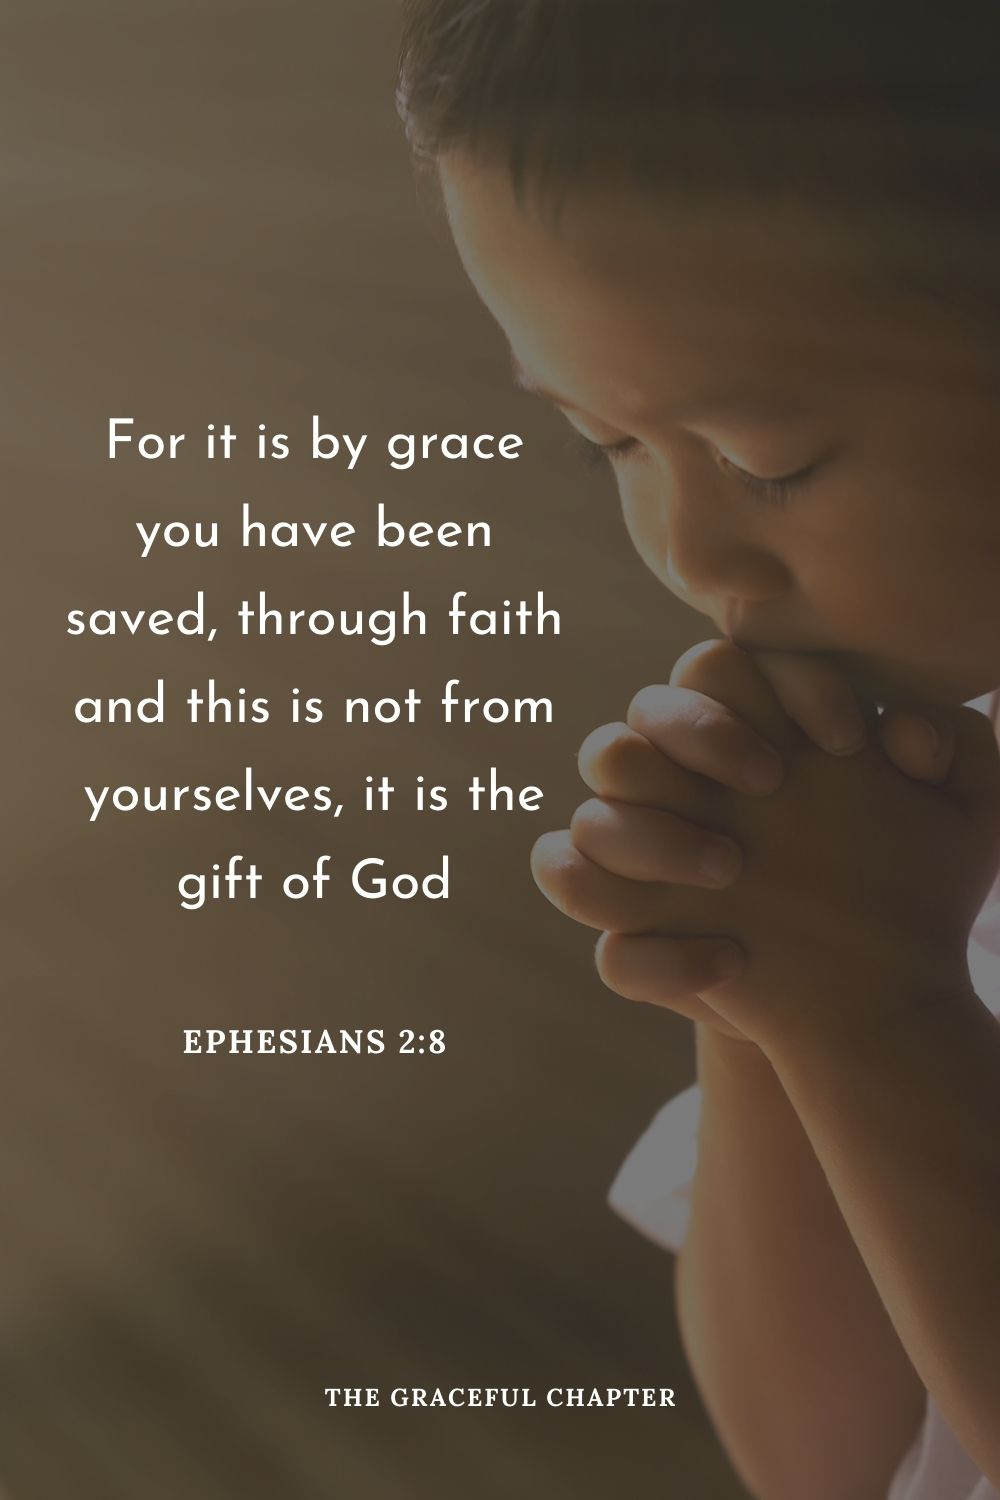 For it is by grace you have been saved, through faith and this is not from yourselves, it is the gift of God